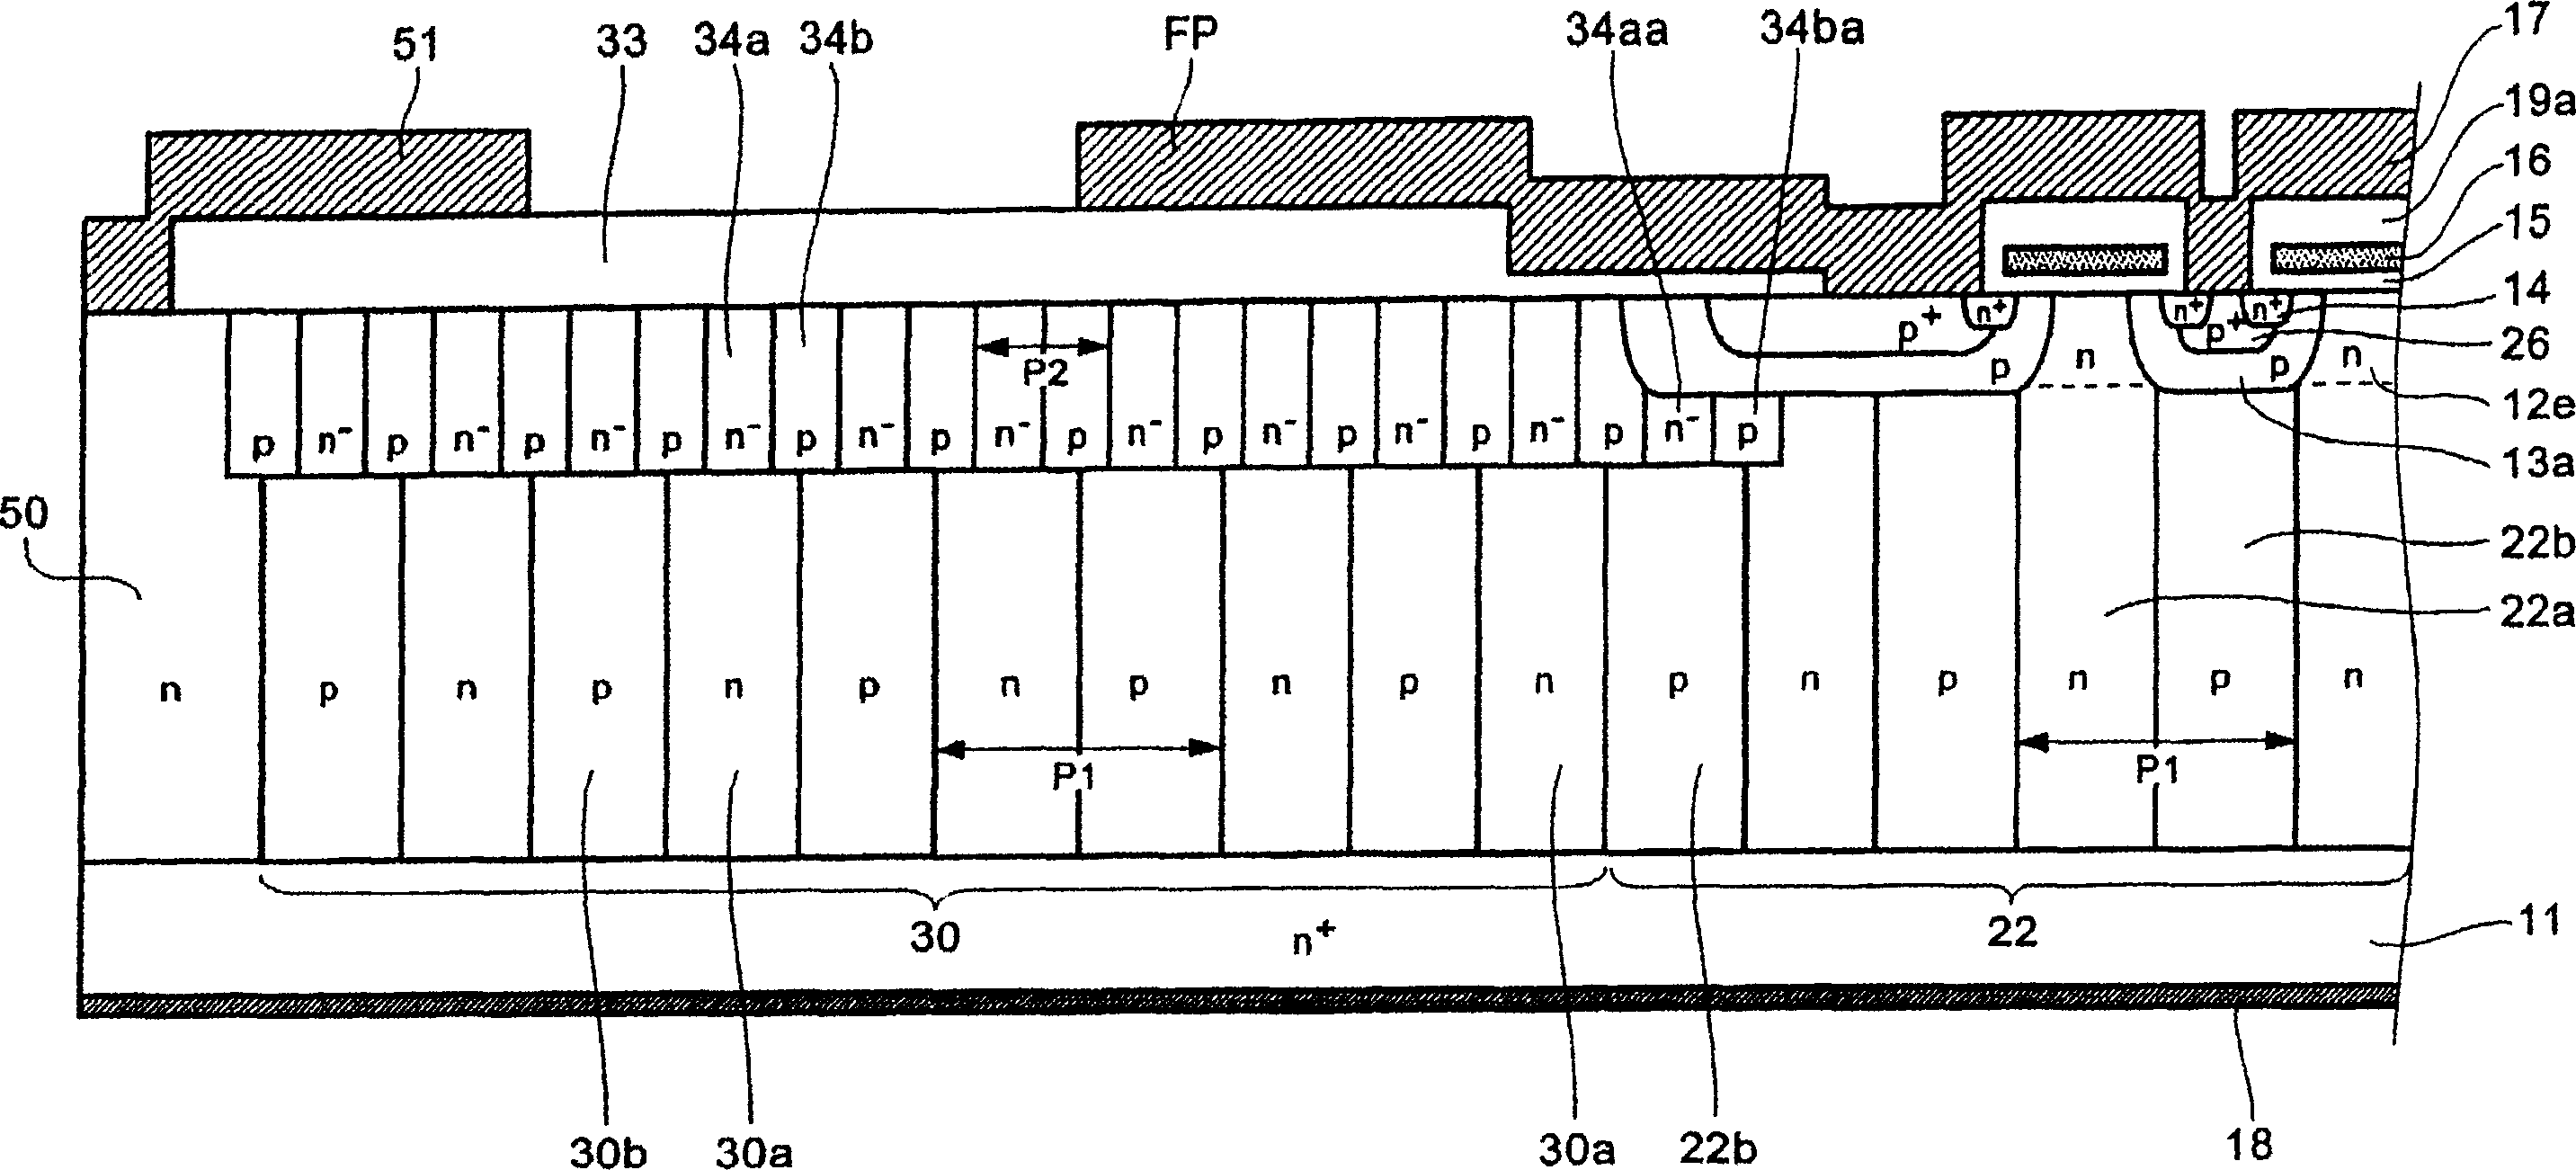 Semiconductor device with improved breakdown voltage and high current capacity